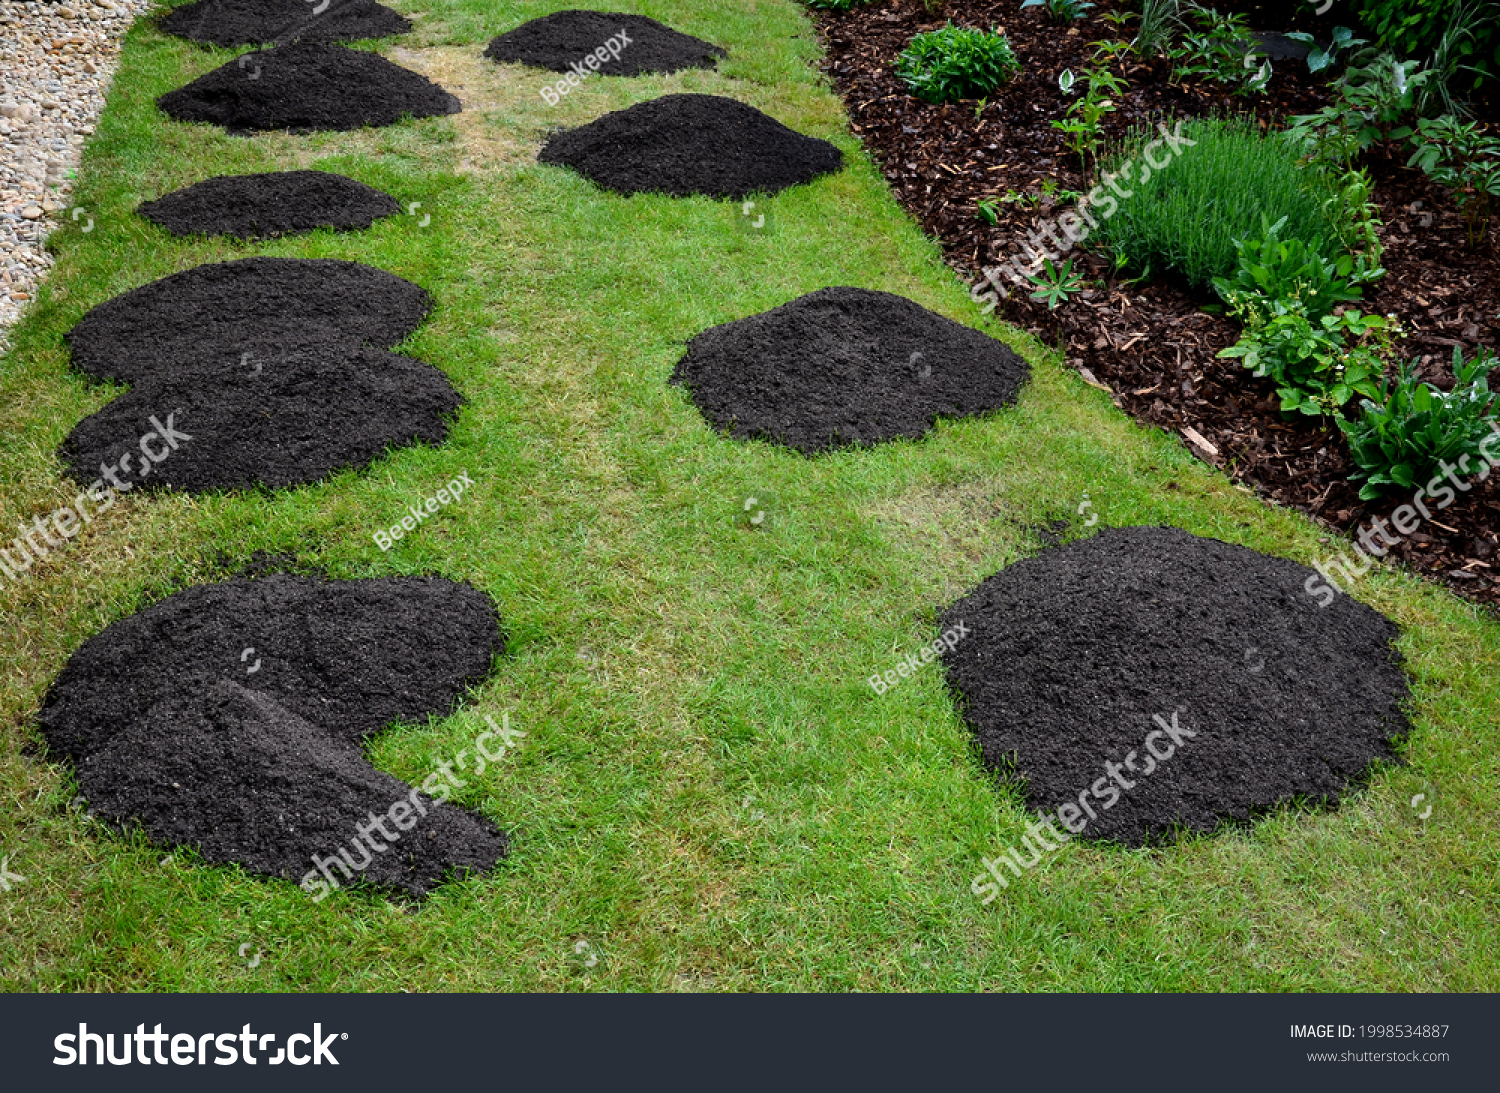 repair of damaged lawns after installation of automatic irrigation. bringing piles of soil and scattering with rakes. lawn sowing and grooving. #1998534887